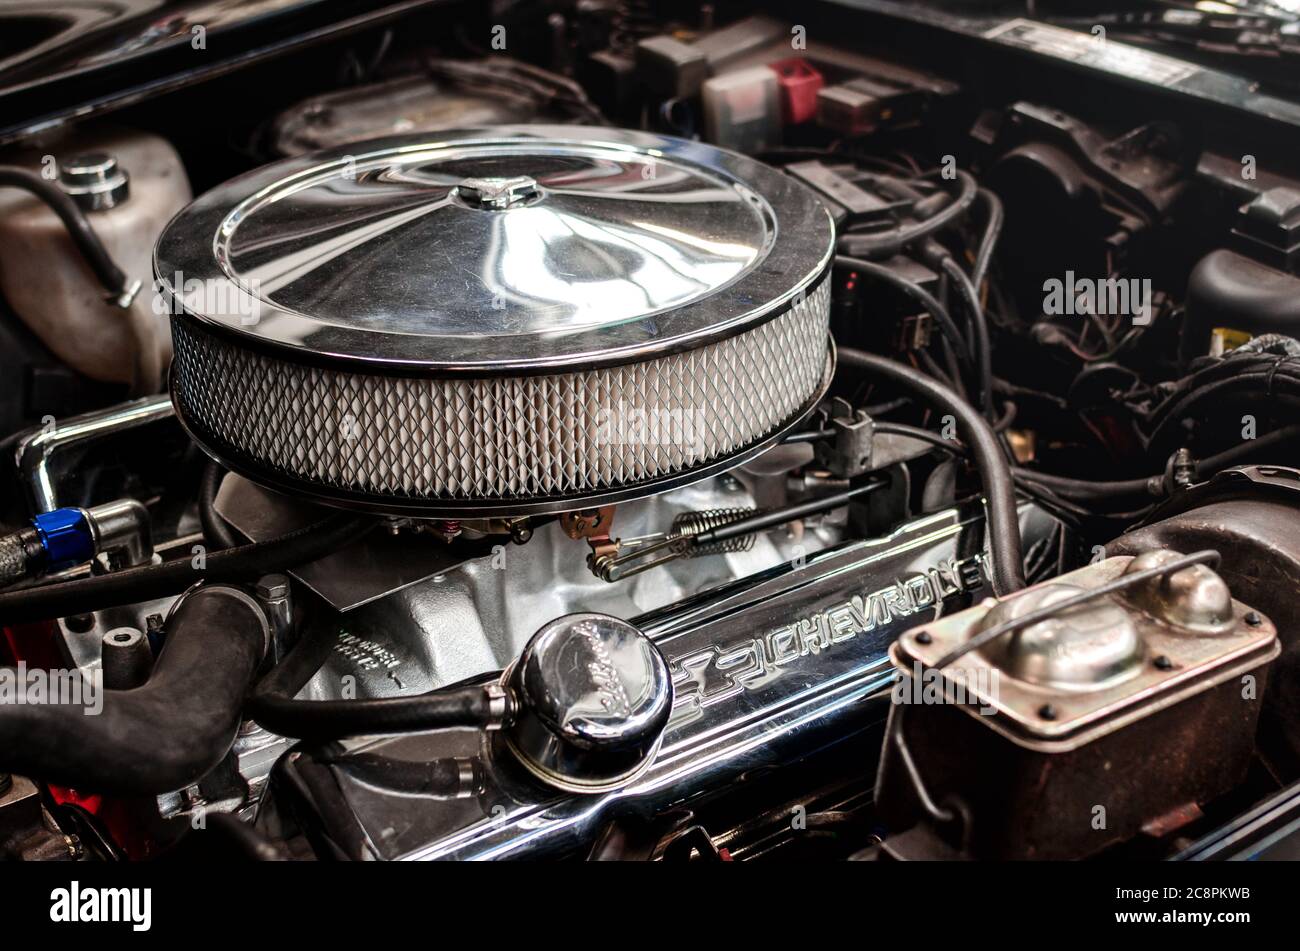 TURIN, ITALY - MARCH 25, 2018: engine detail of a 1980 Chevrolet Corvette L-82 on a classic american car exhibition in Turin (Italy) on march 25, 2018 Stock Photo